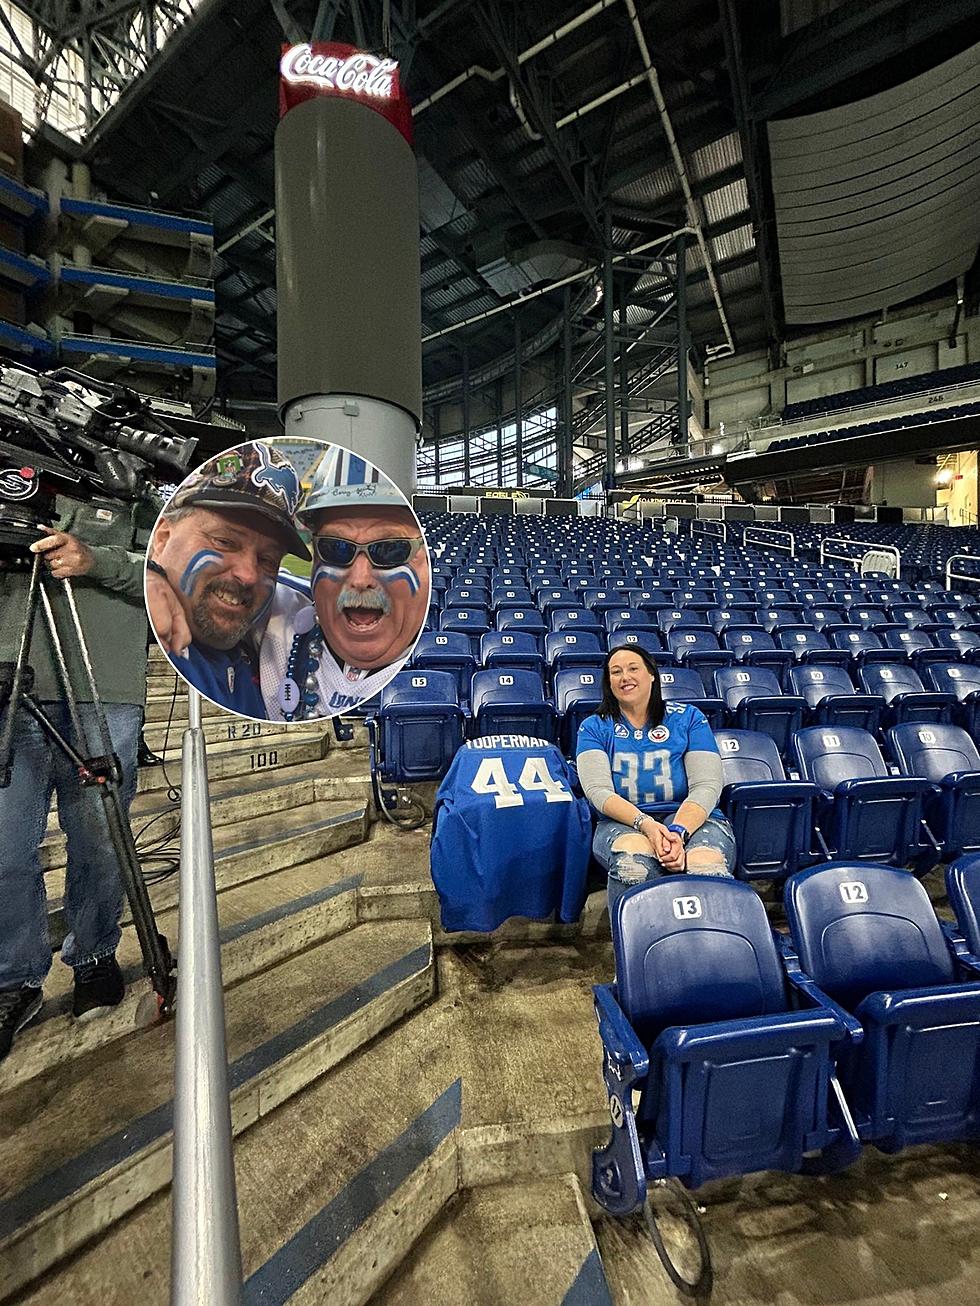 There Will Be Just One &#8216;Empty&#8217; Seat at Ford Field Sunday Night